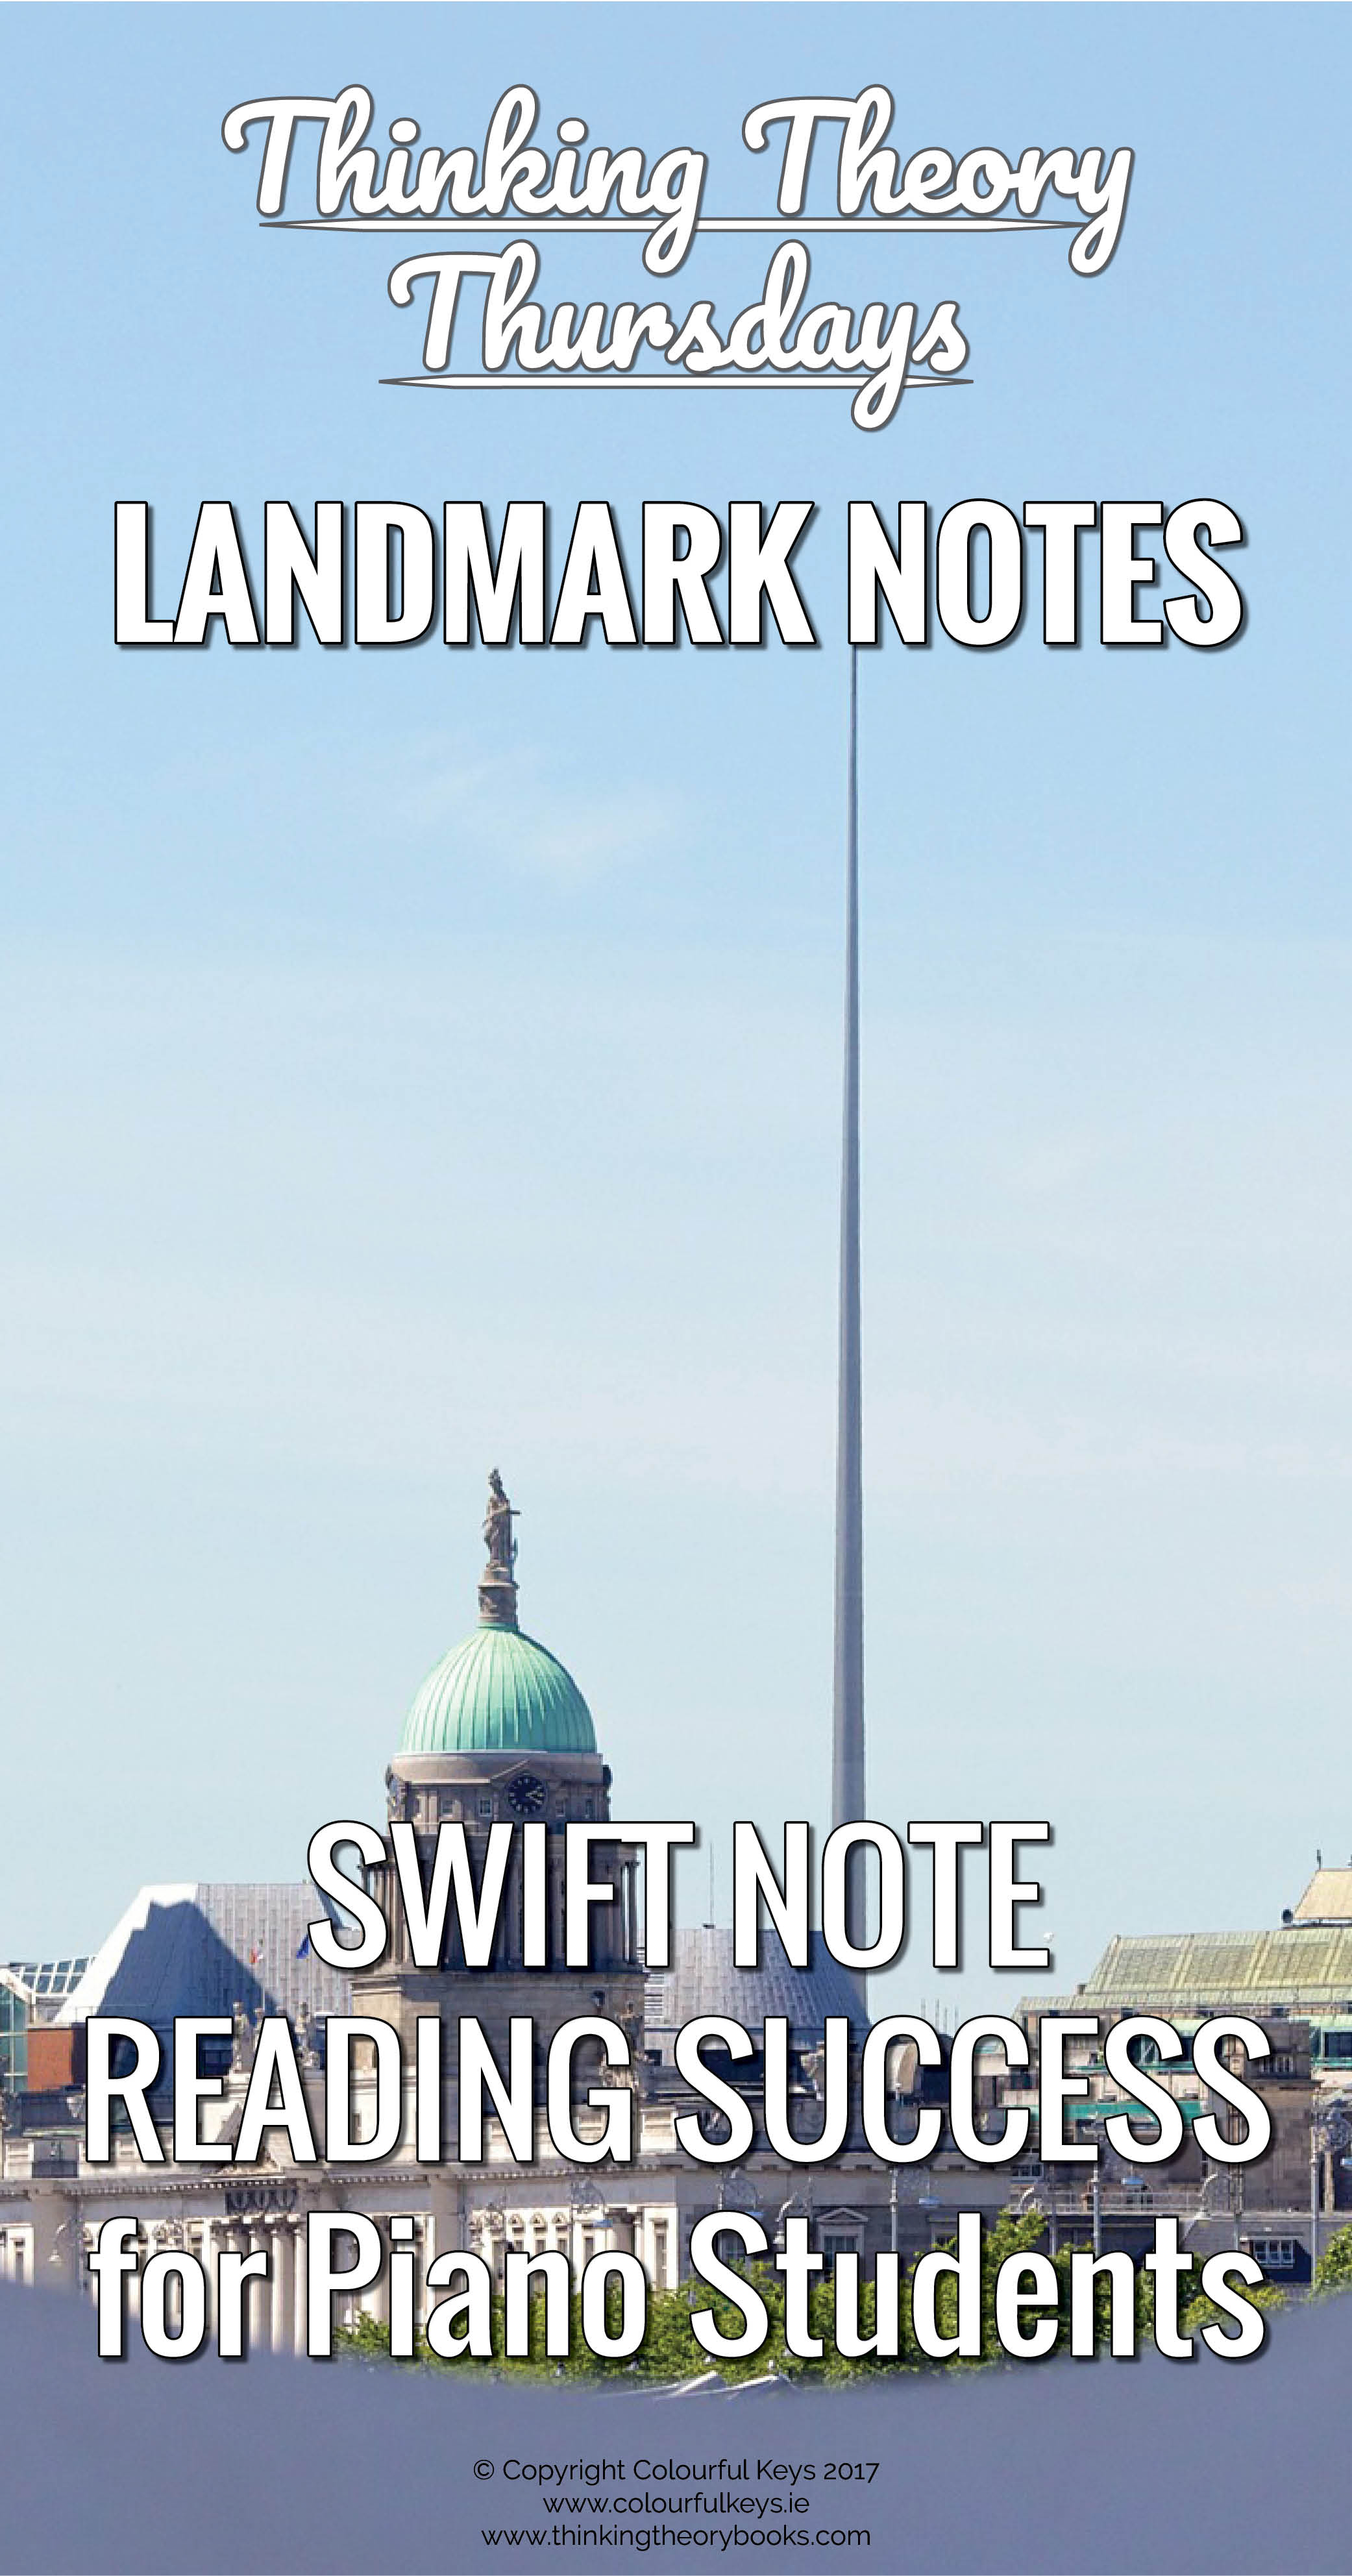 Landmark notes are the surest way to successful note reading